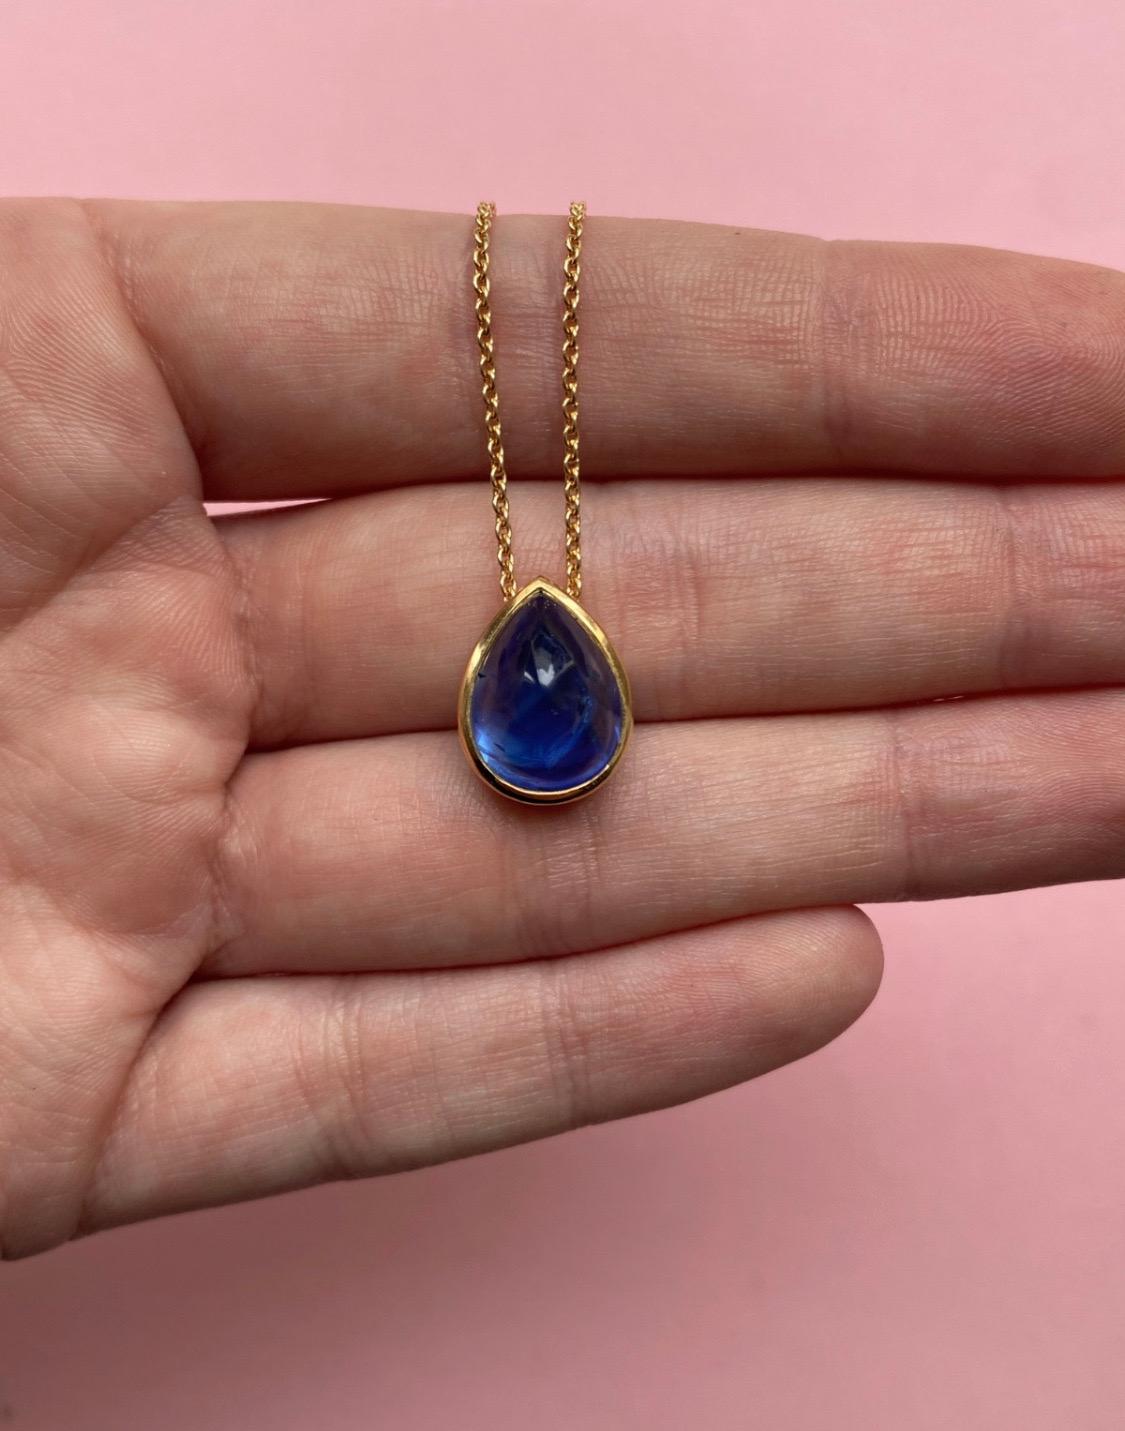 A delicate 18 carat gold necklace with a drop shaped cabochon cut sapphire (unheated Sri Lanka, 10.33 carat), on a thin chain.
weight: 7.43 g
length: 40 - 42 cm.
dimensions: 15 x 11 cm.